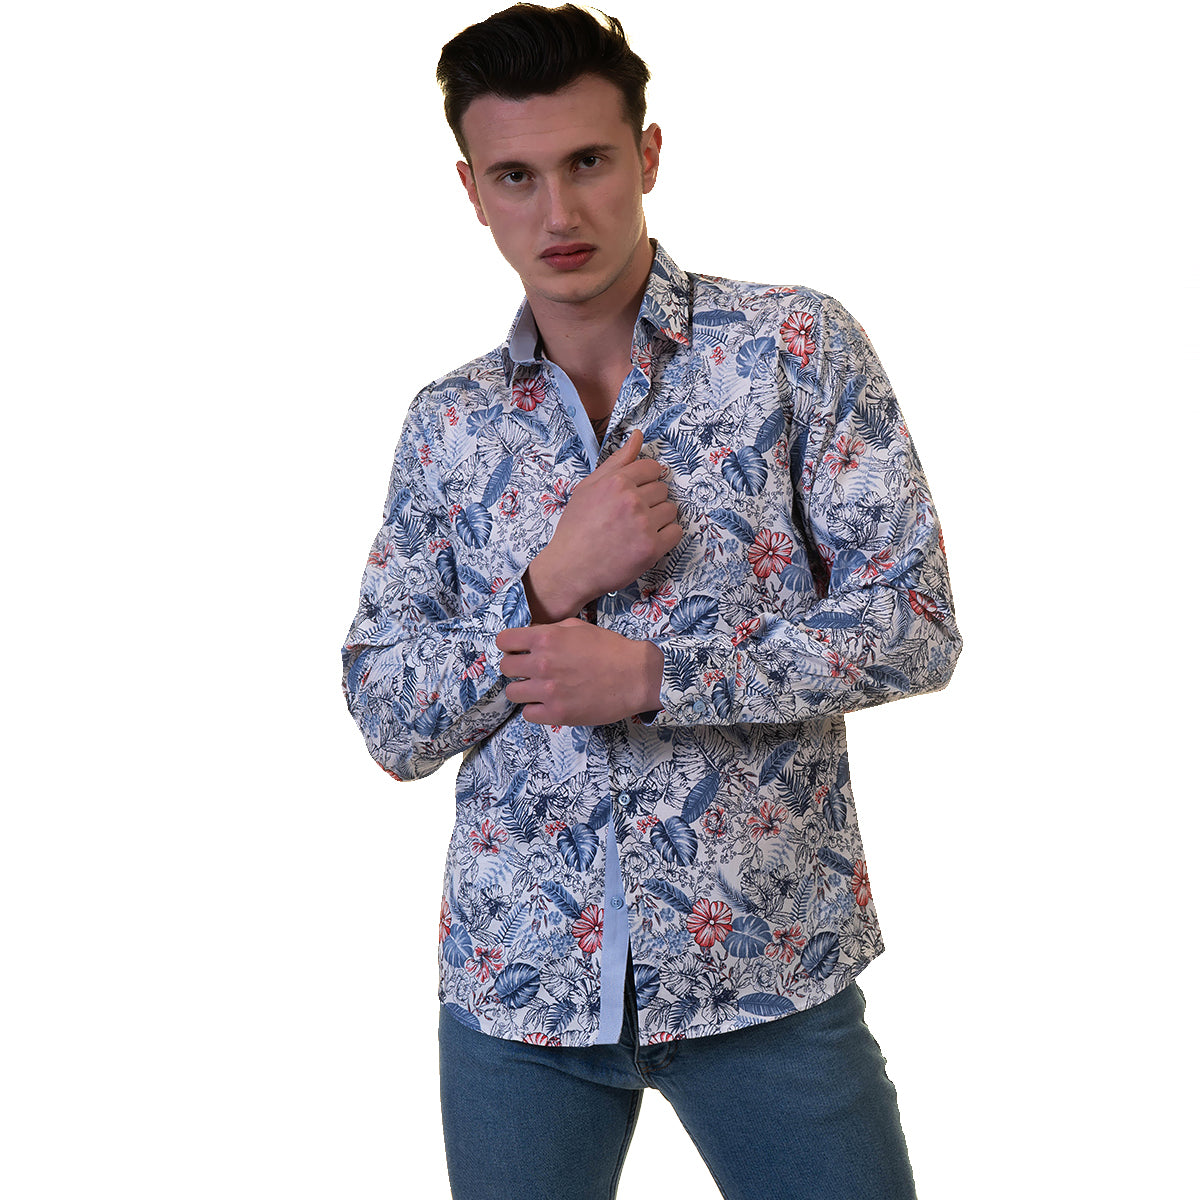 Blue Mens Slim Fit Designer Dress Shirt - tailored Cotton Shirts for Work and Casual Wear